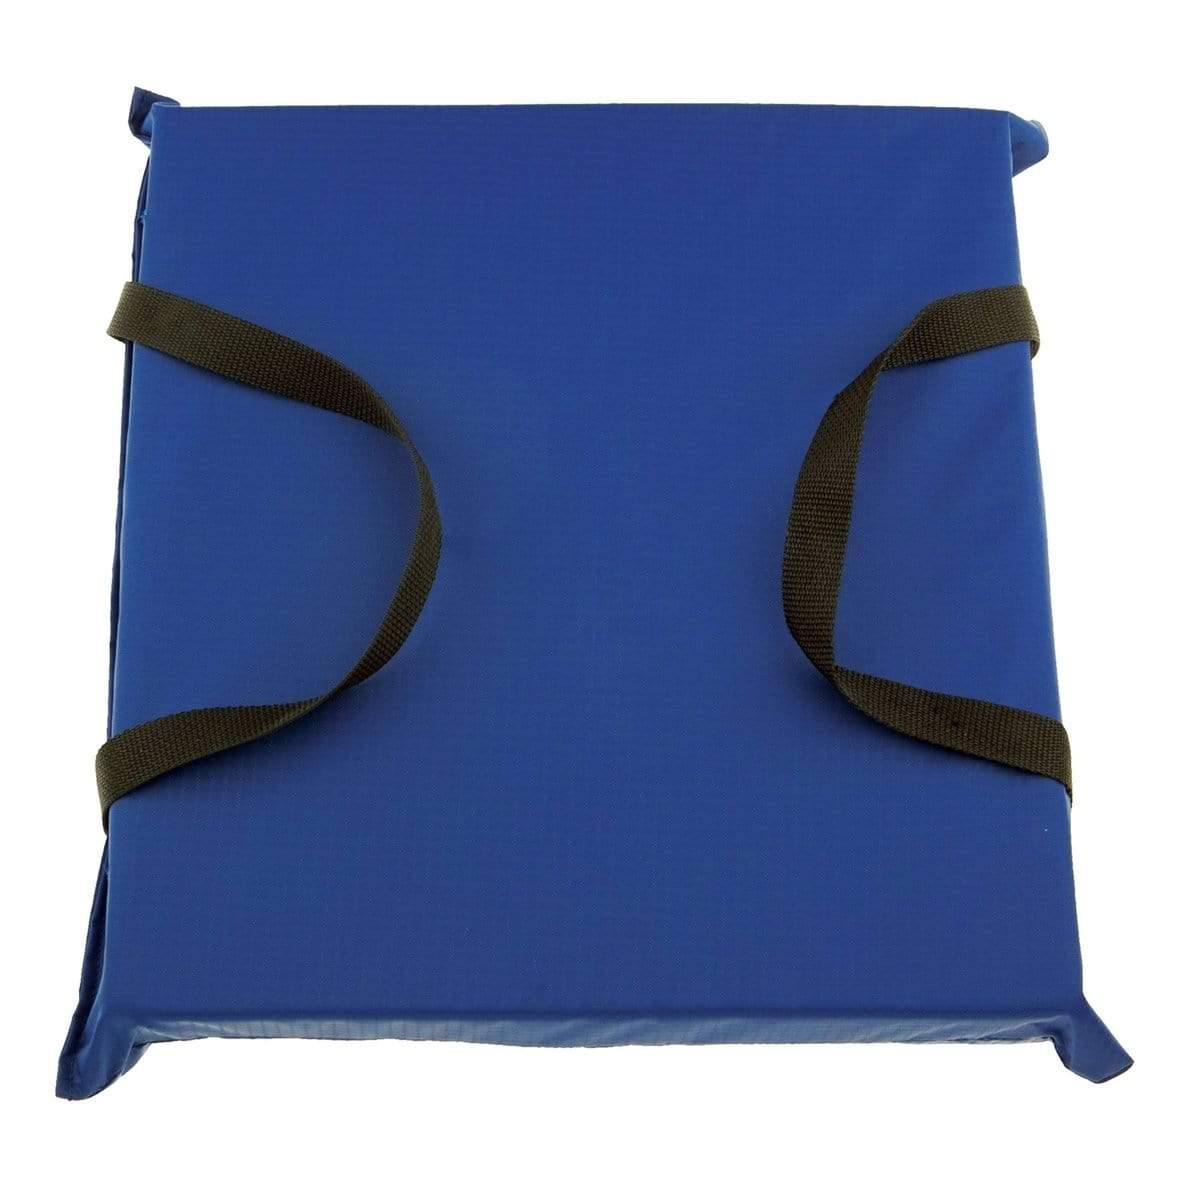 Onyx Outdoor Qualifies for Free Shipping Onyx Comfort Foam Boat Cushion Blue #110100-500-999-12